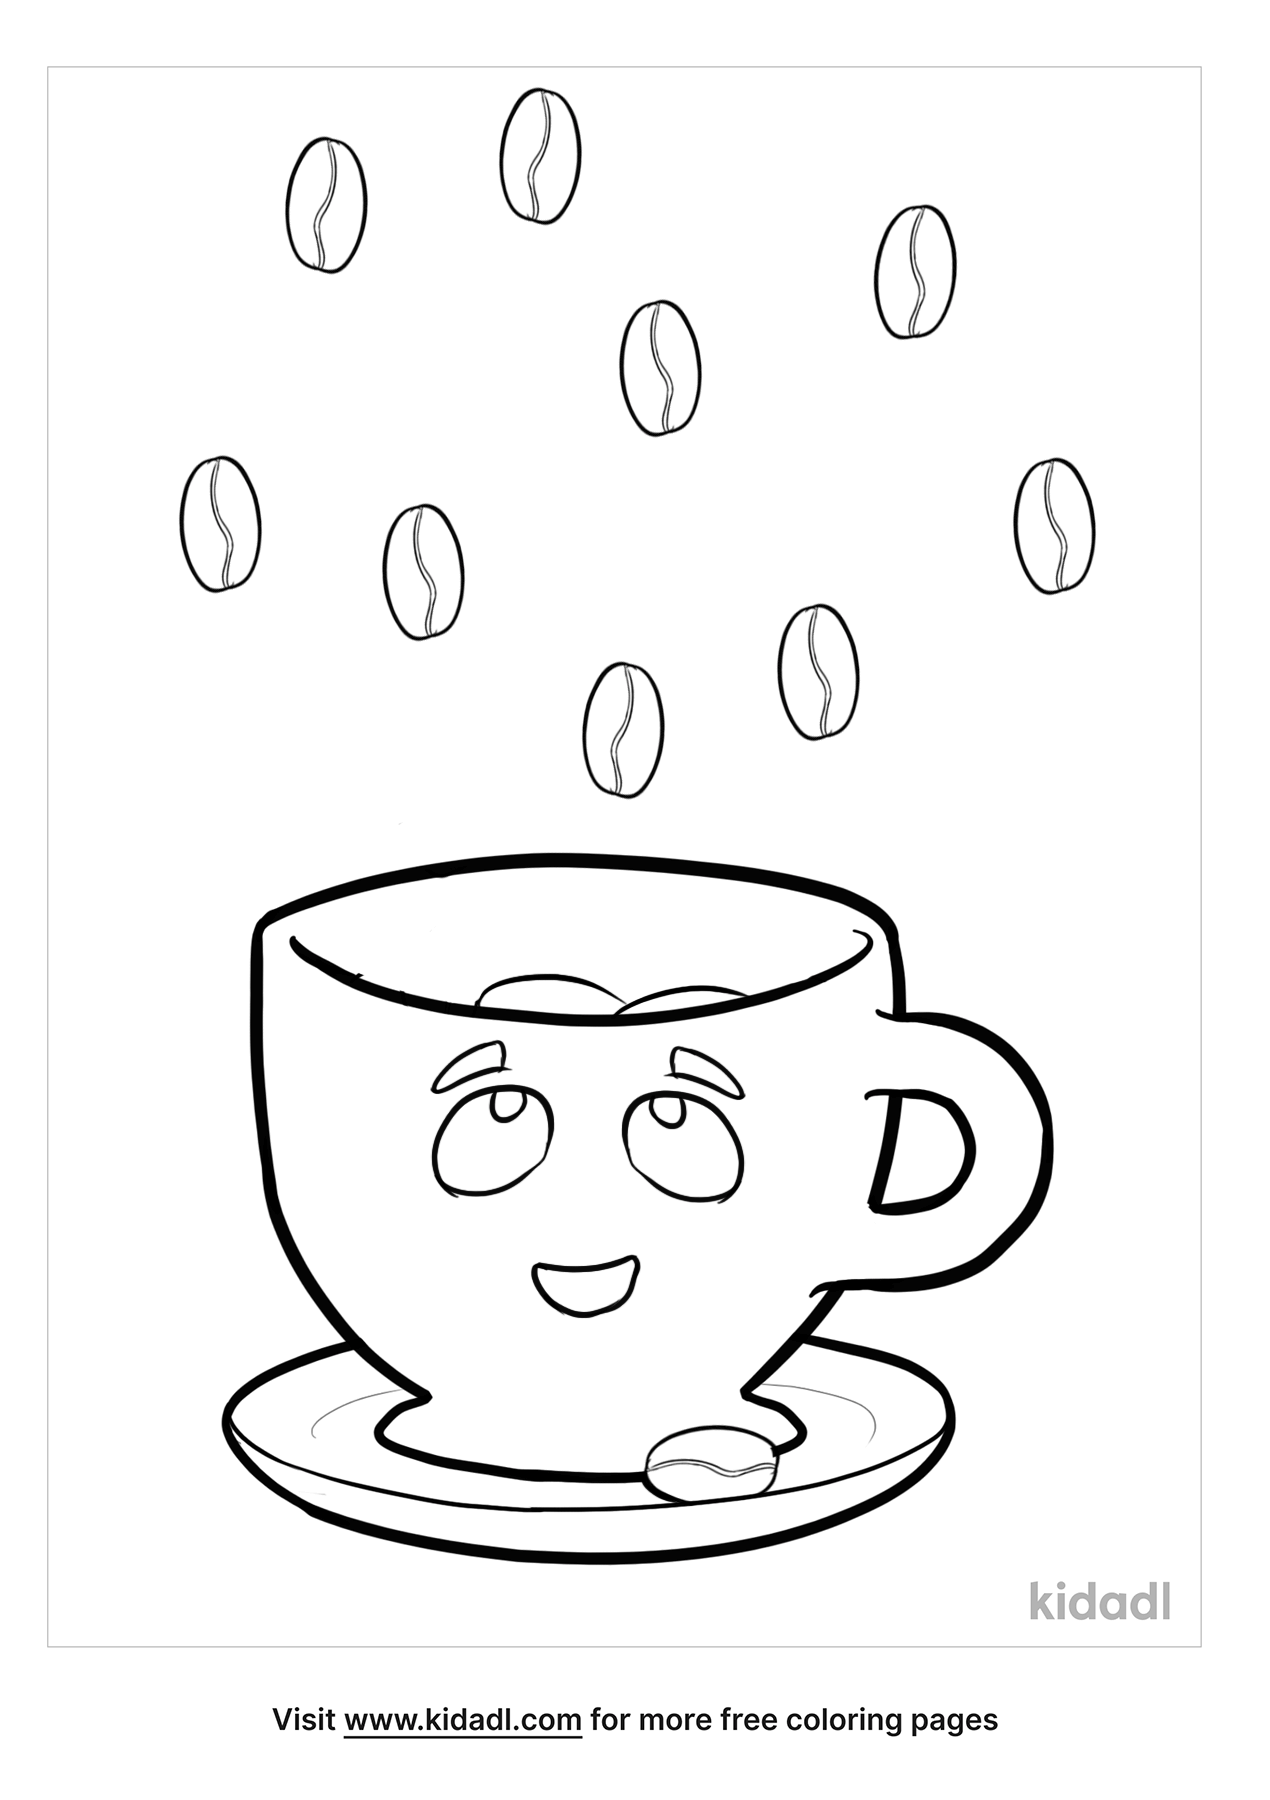 16 Coffee Cup Coloring Pages Printable Coloring Pages - Bank2home.com